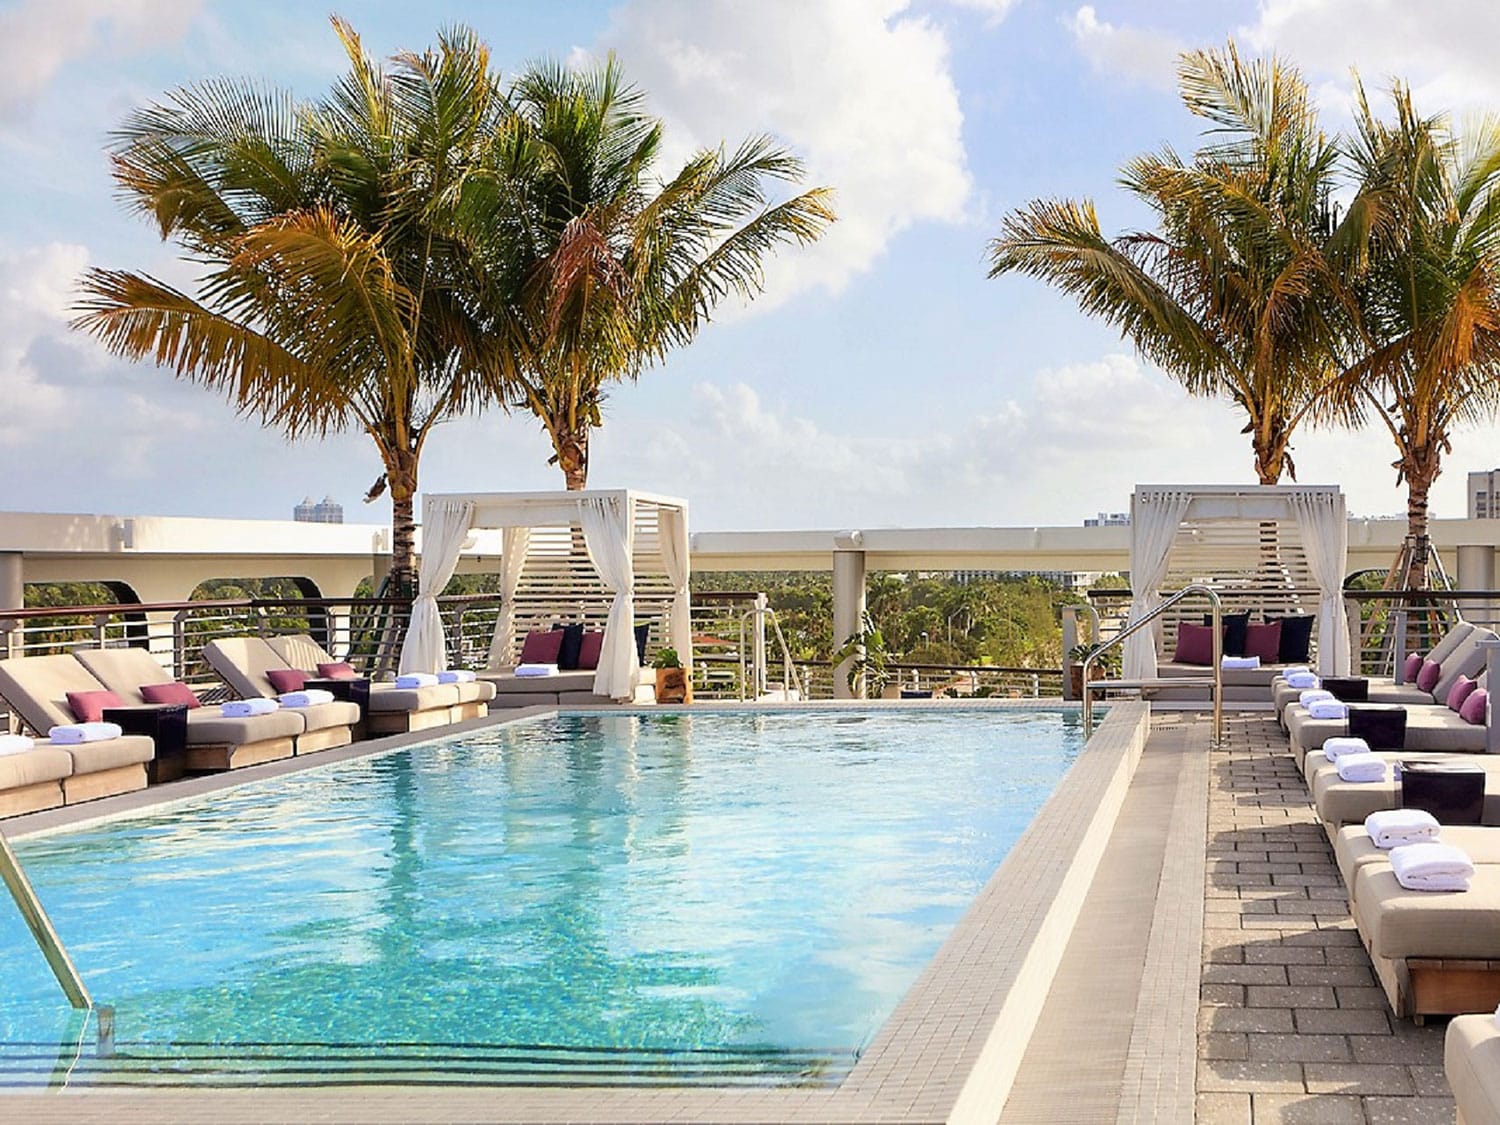 A resort-style lounge pool surrounded by palms at Kimpton Palomar South Beach.